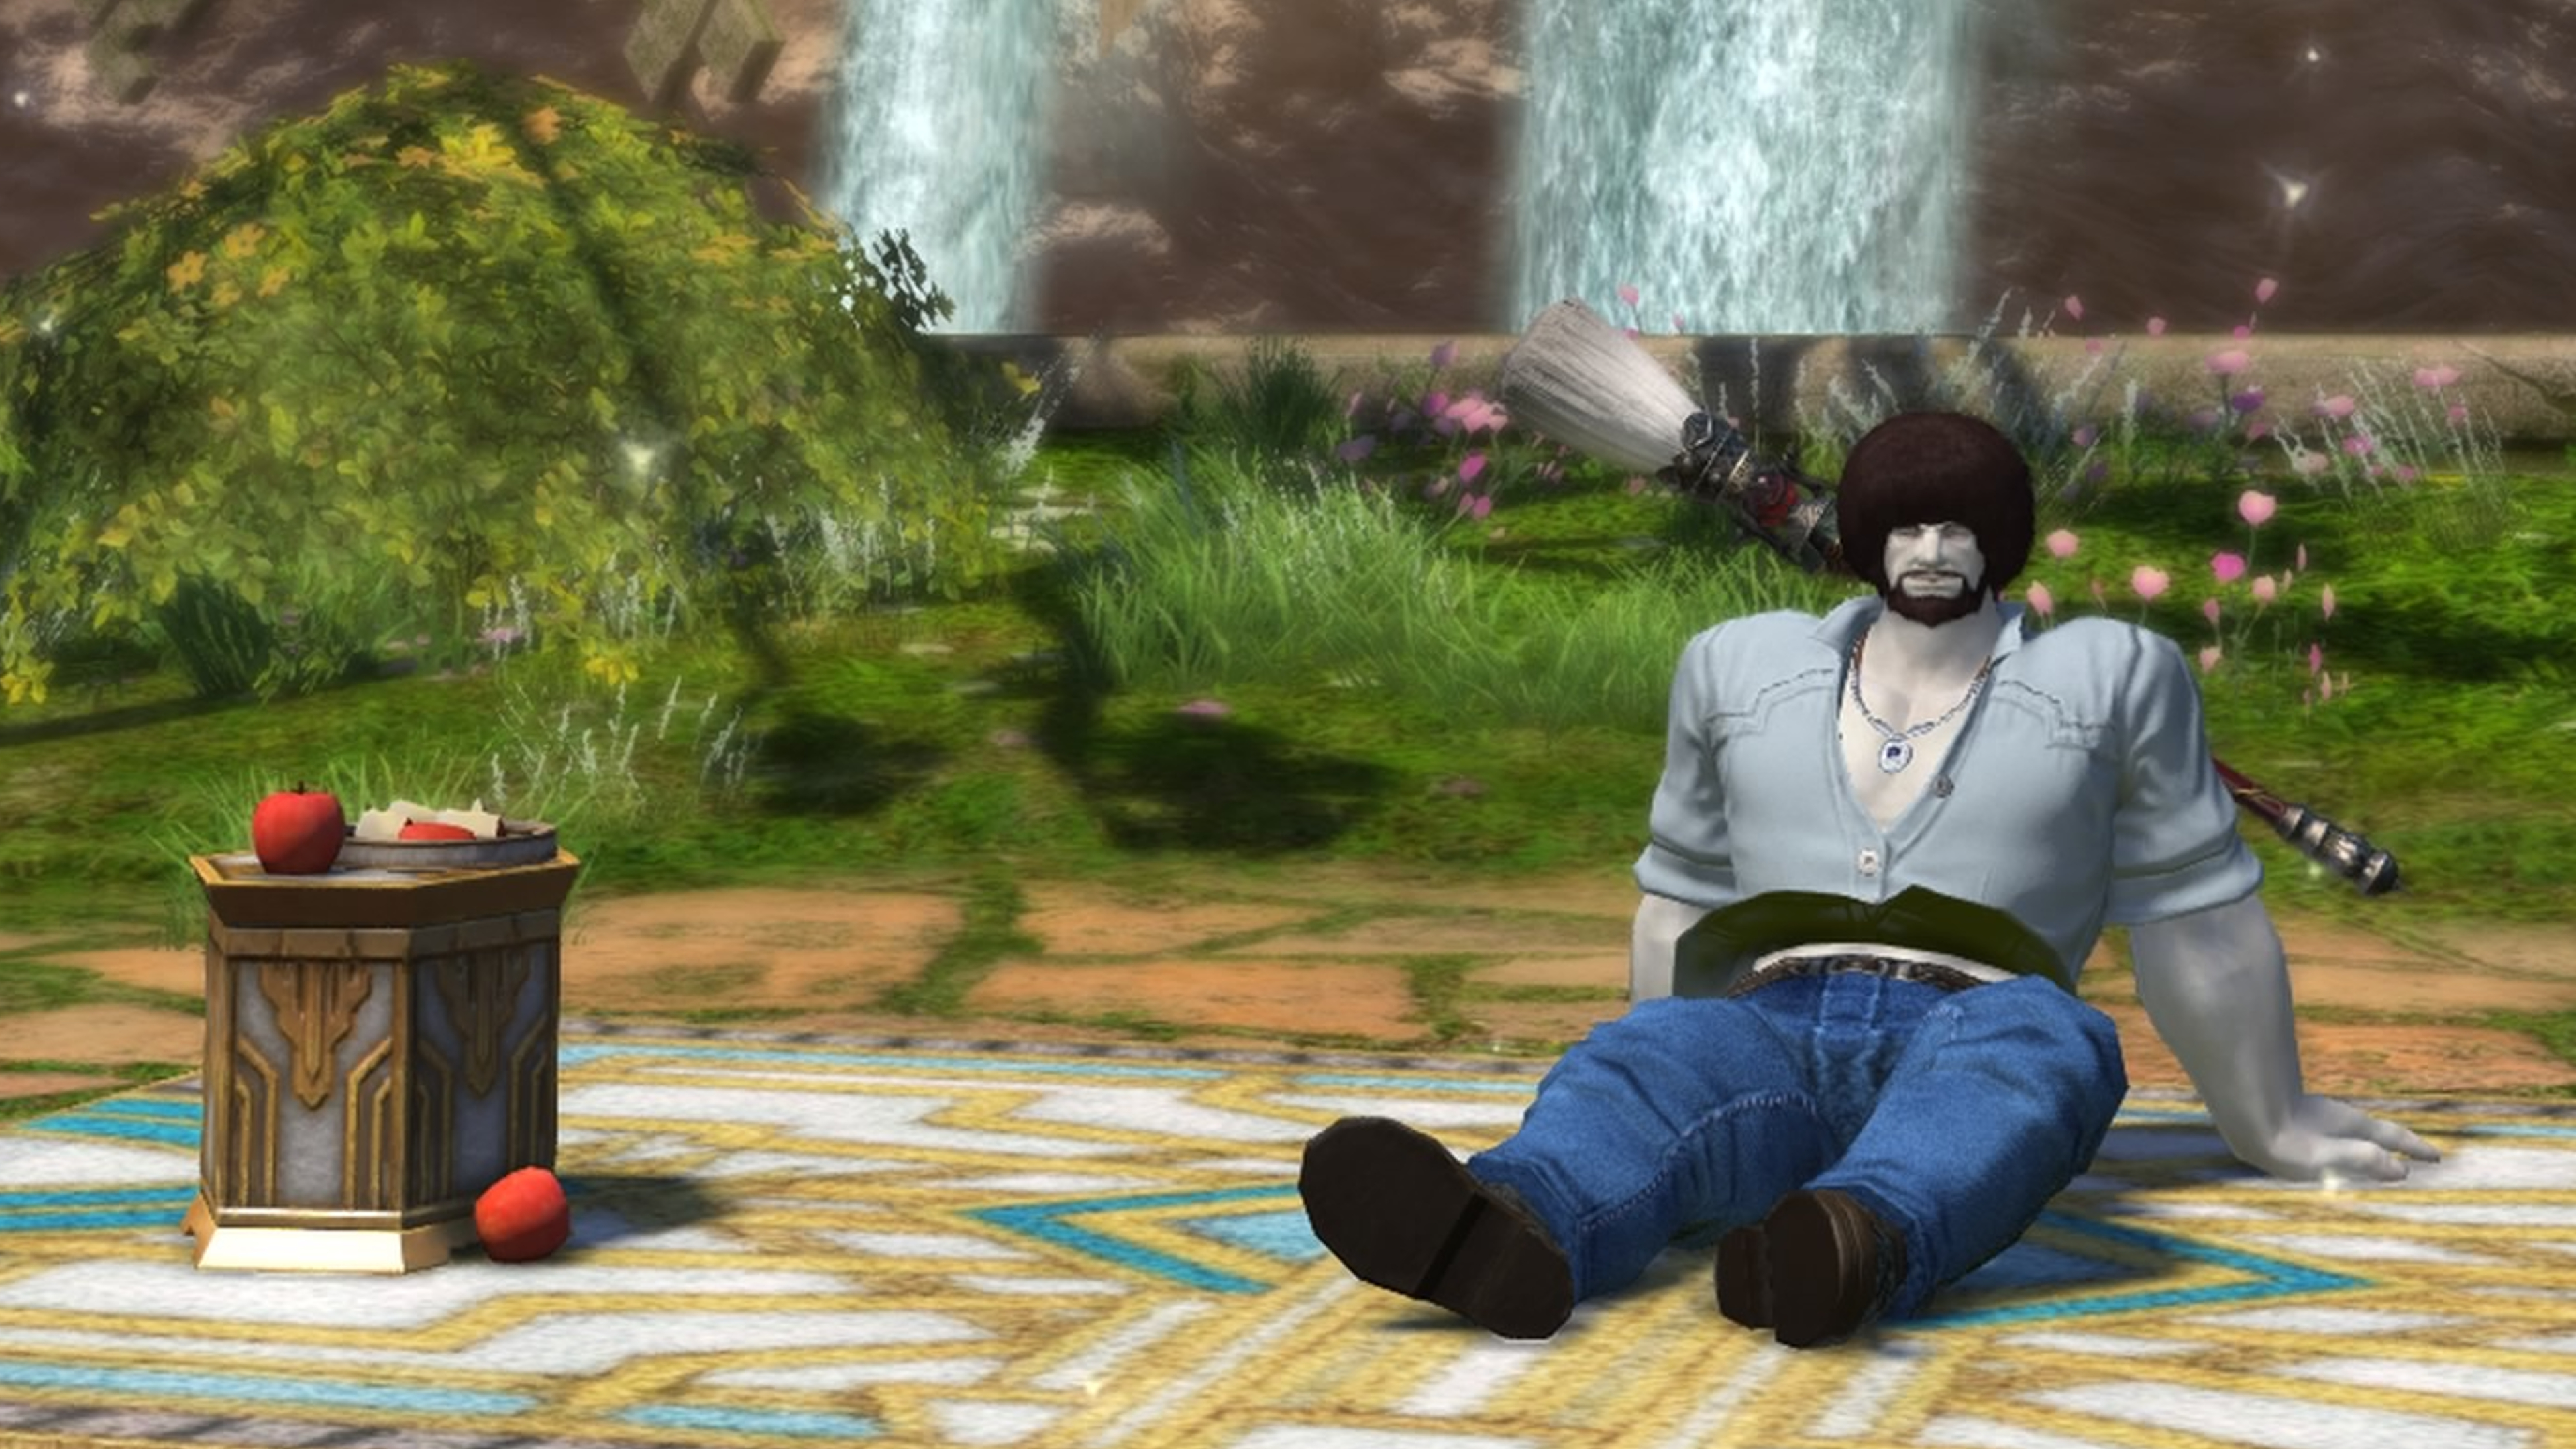  Final Fantasy 14's newest class has inspired this buff Bob Ross to spread good vibes and turn the party into happy little clouds 